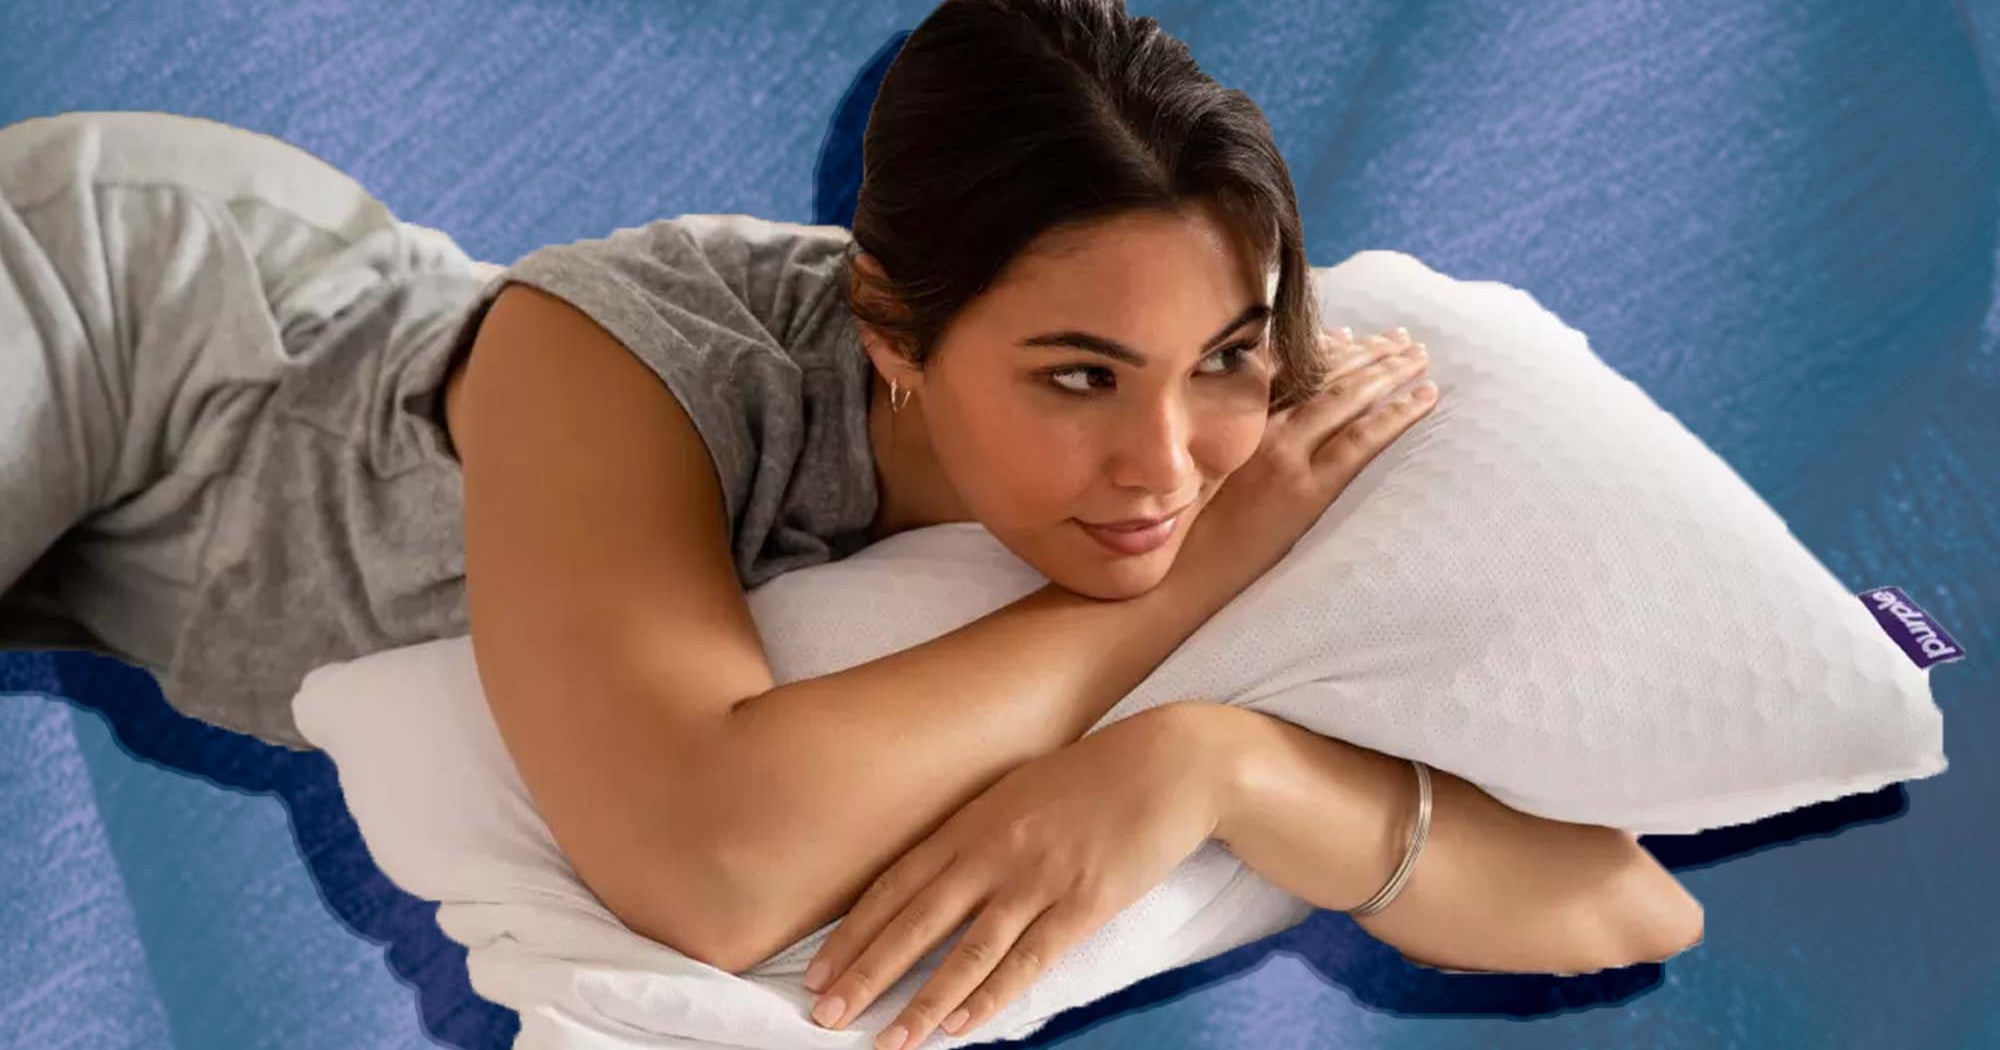 11 Best Pillows for Back Pain in 2023 - Orthopedic Pillows for